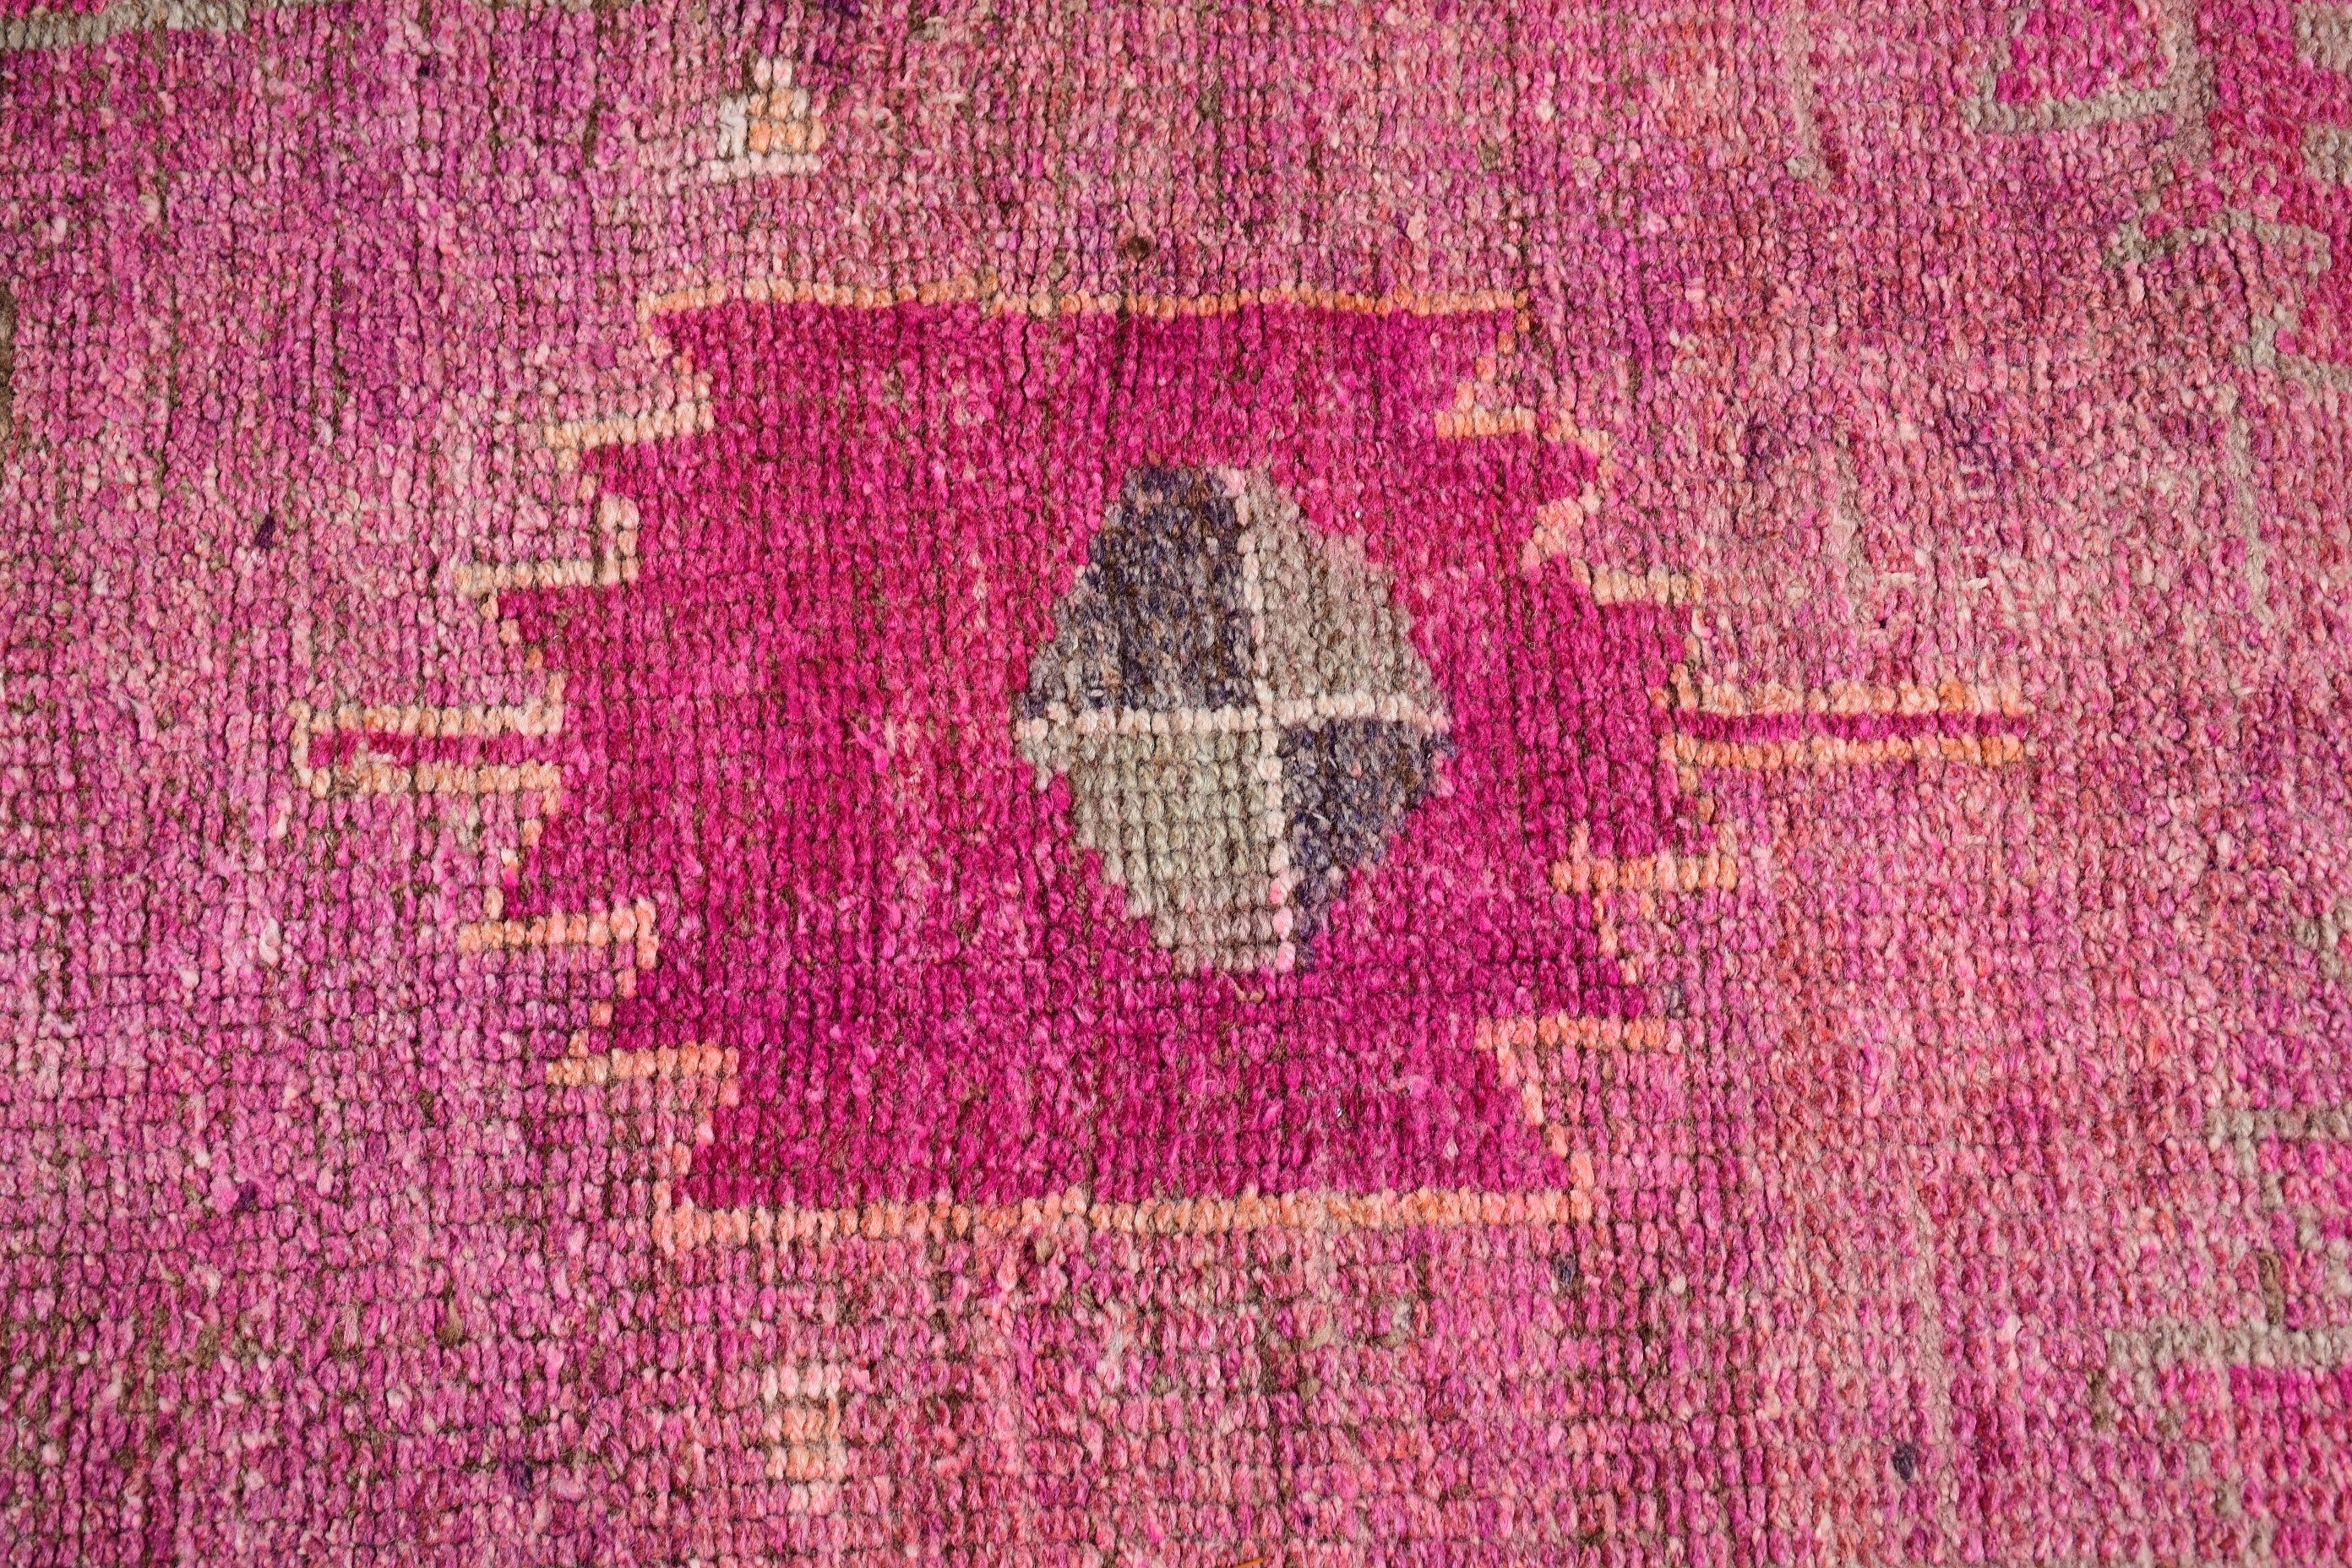 Vintage Rug, Hand Knotted Rug, Stair Rug, 2.2x10.8 ft Runner Rugs, Cool Rugs, Pink Moroccan Rug, Rugs for Kitchen, Wool Rug, Turkish Rug